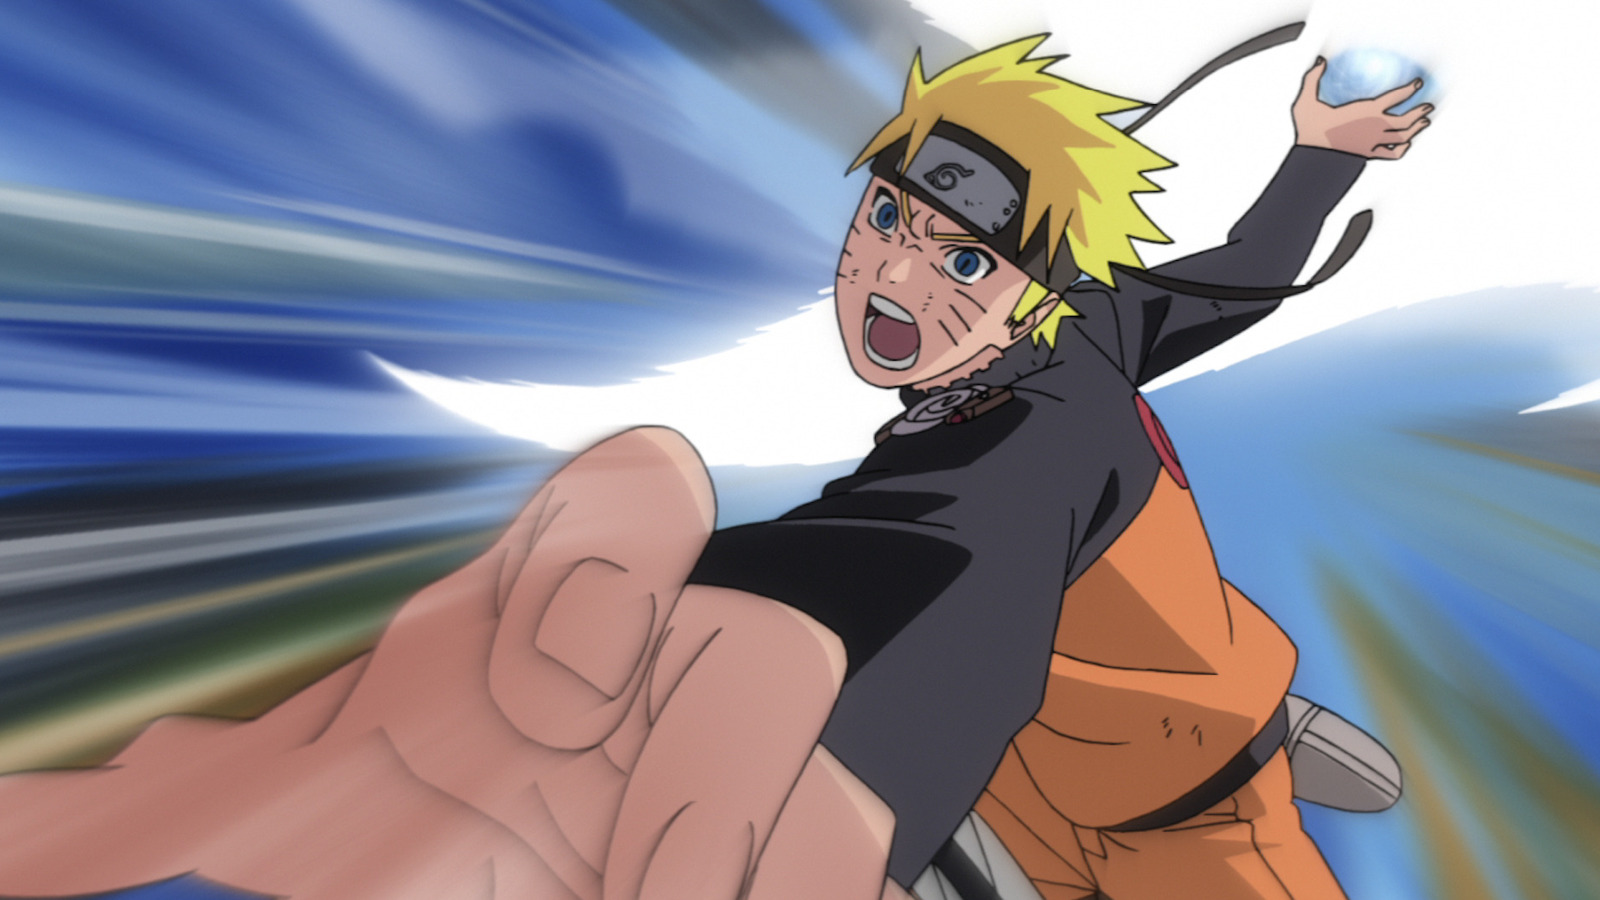 Maile Flanagan Knows How Much Naruto Signature Phrase Means To Fans